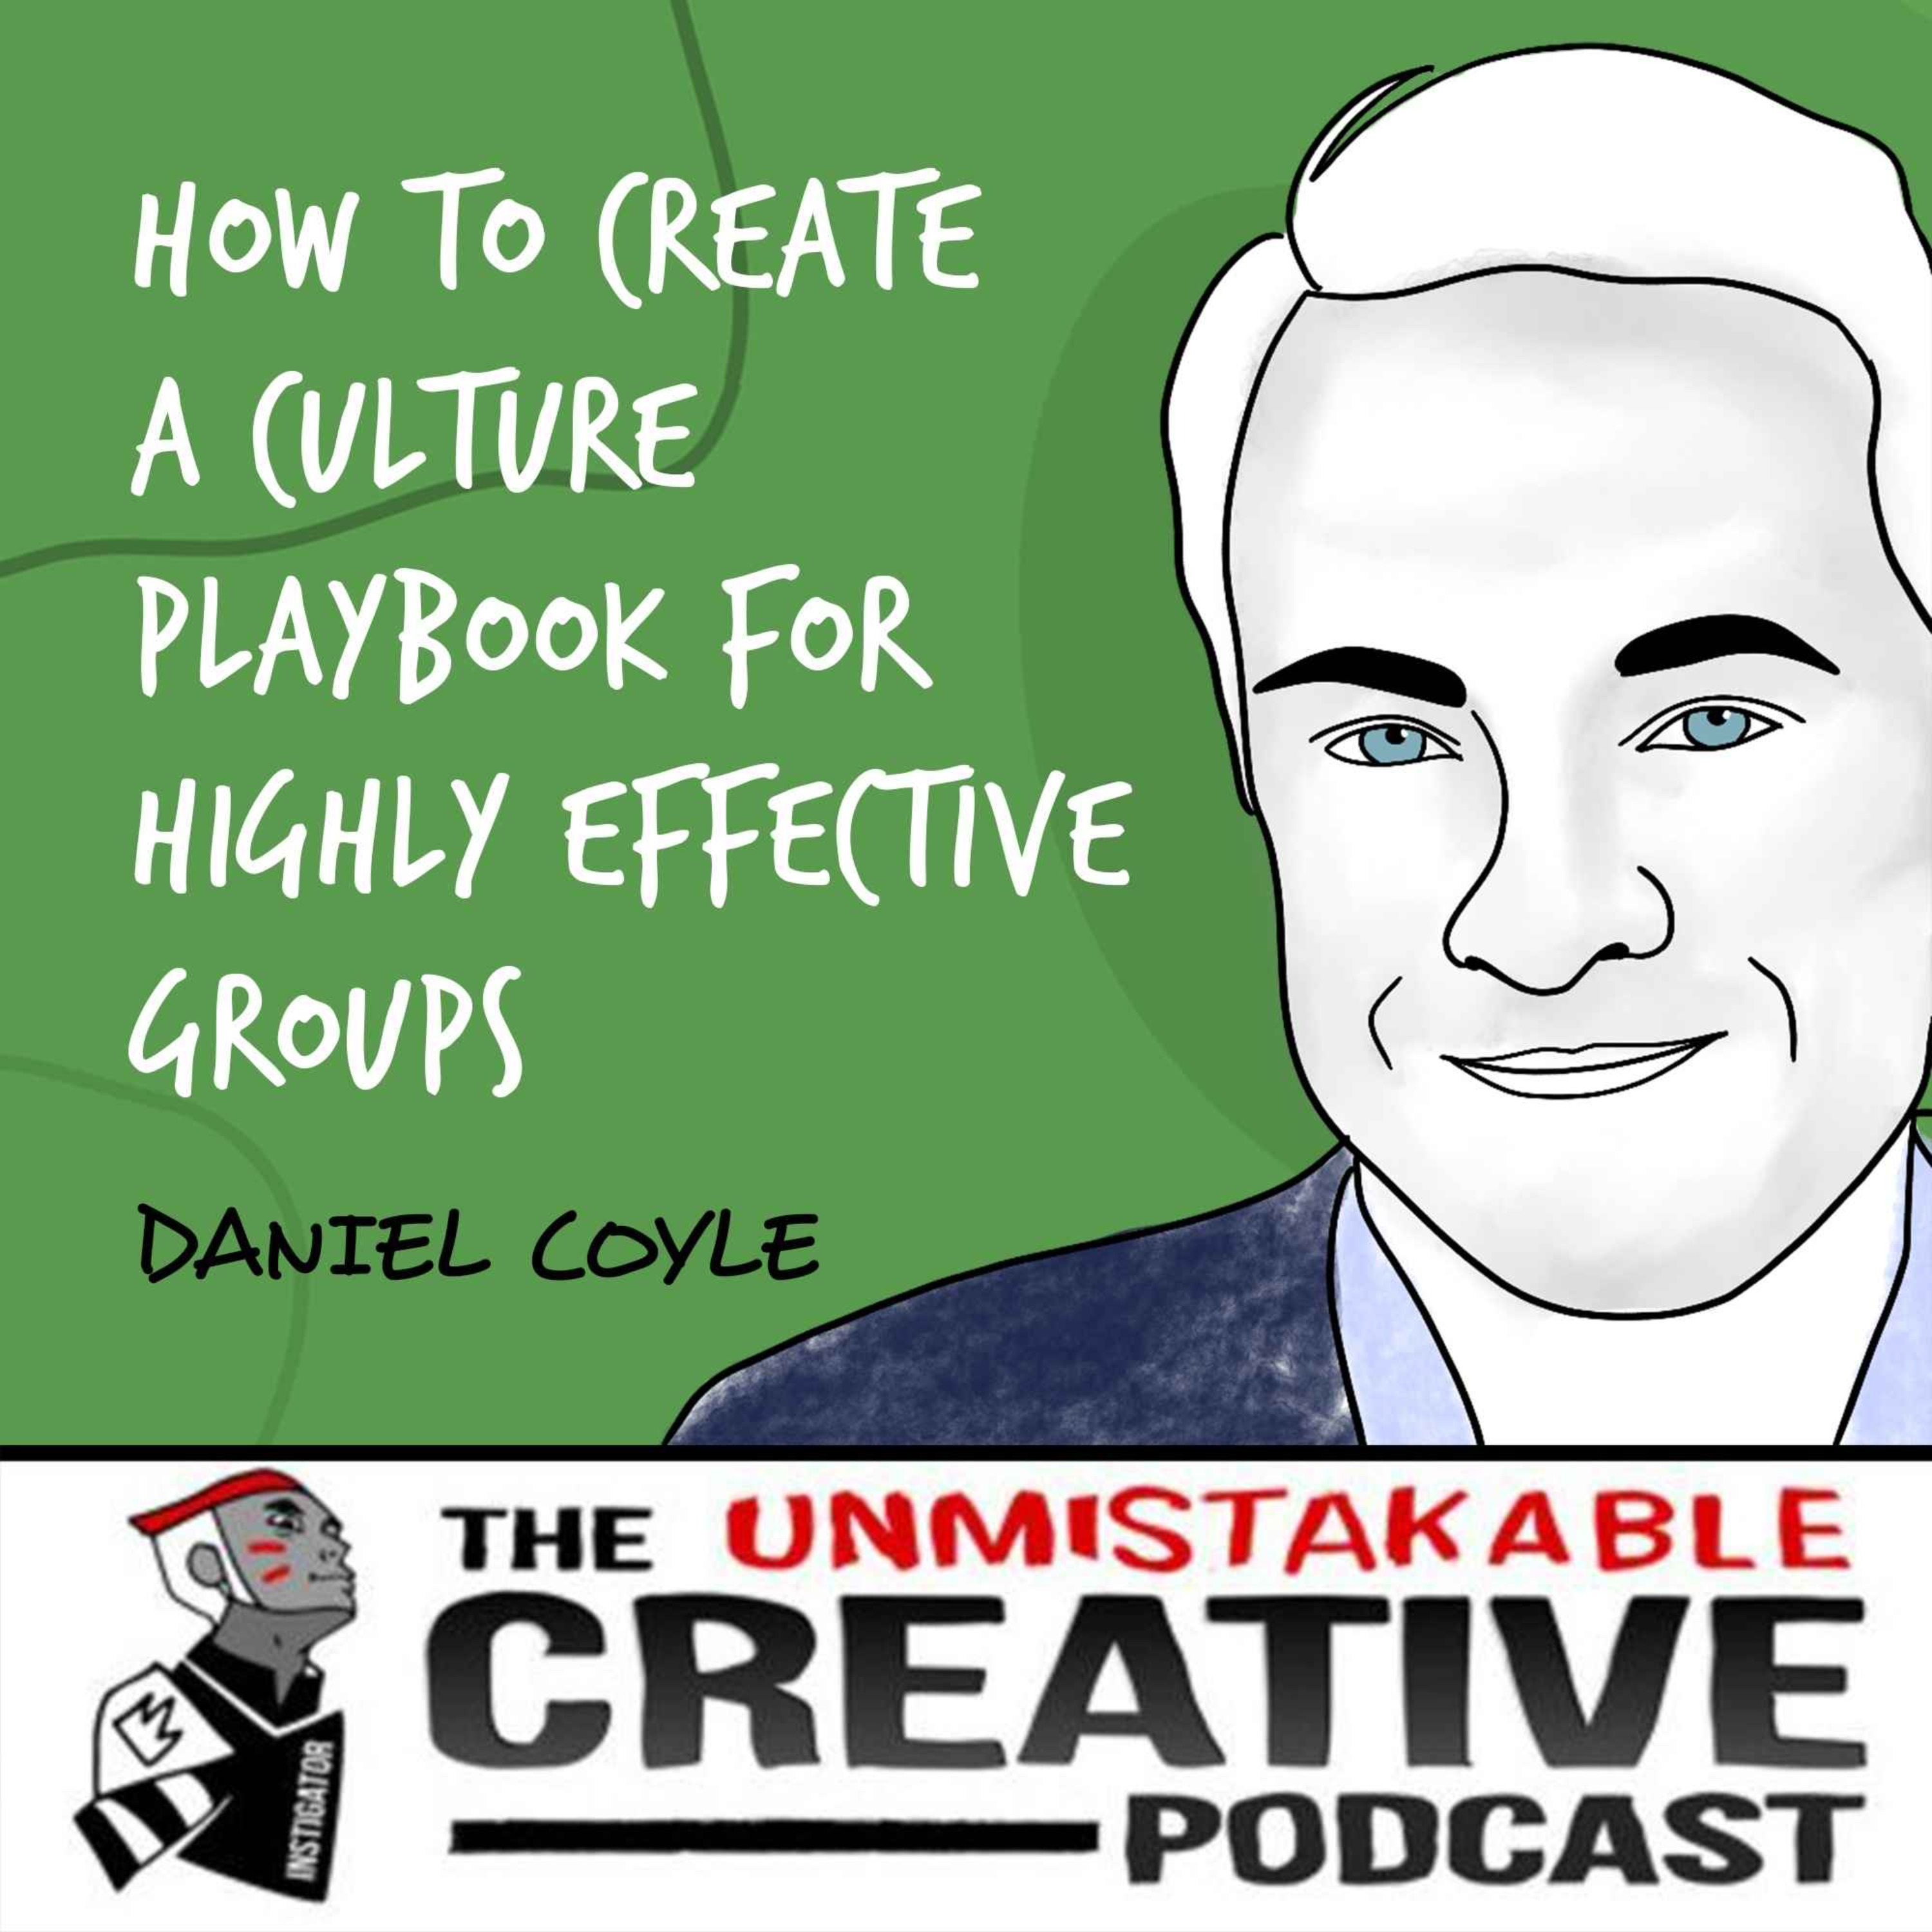 Daniel Coyle | How to Create a Culture Playbook For Highly Effective Groups Image